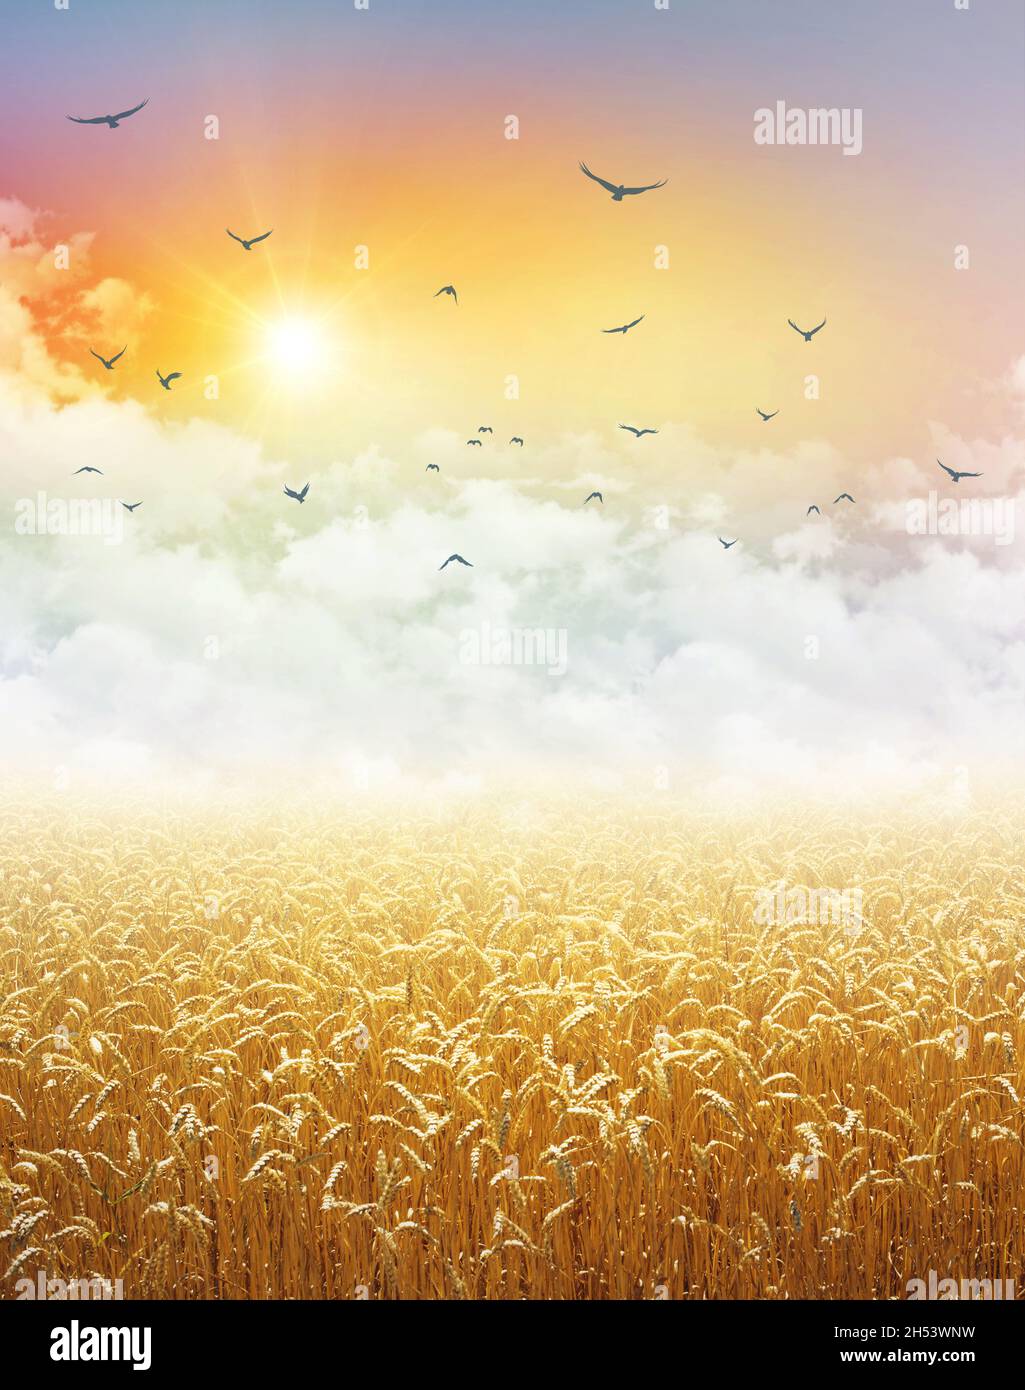 Gold wheat field growing under a colorful sky, low white clouds, flying birds and the rising sun Stock Photo